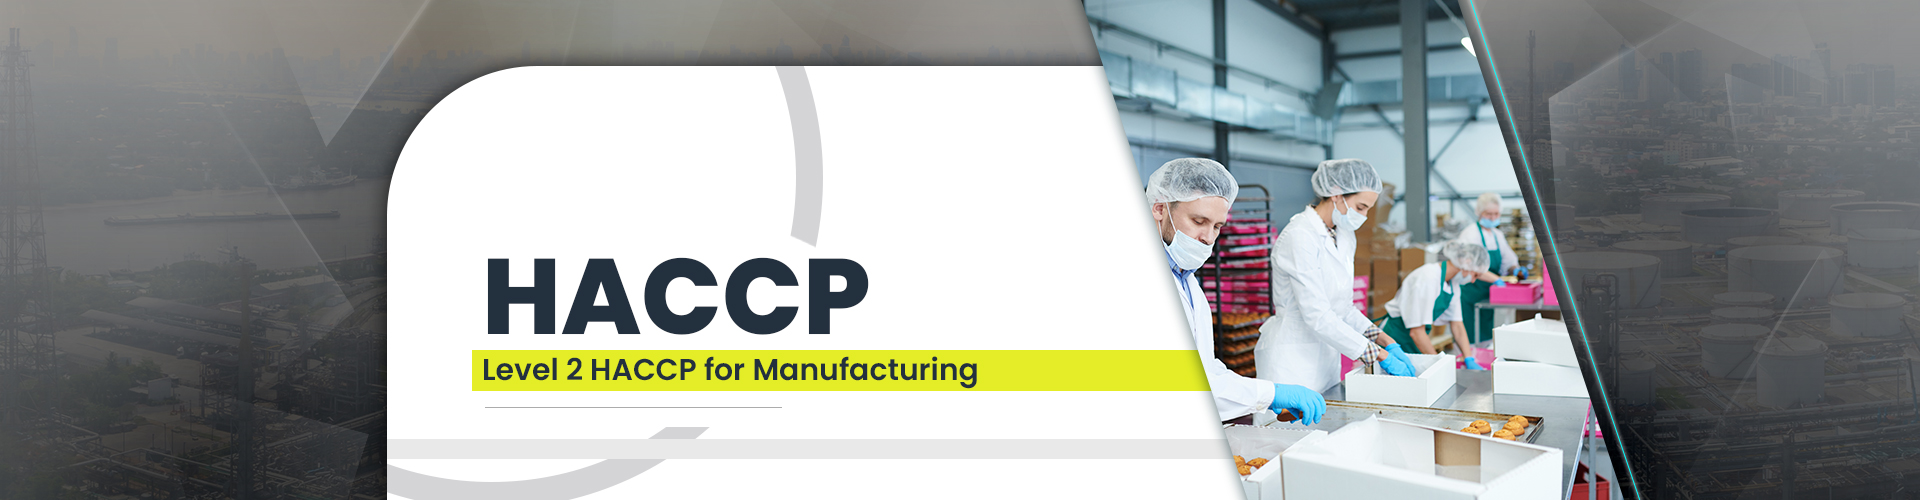 Level 2 HACCP for Manufacturing